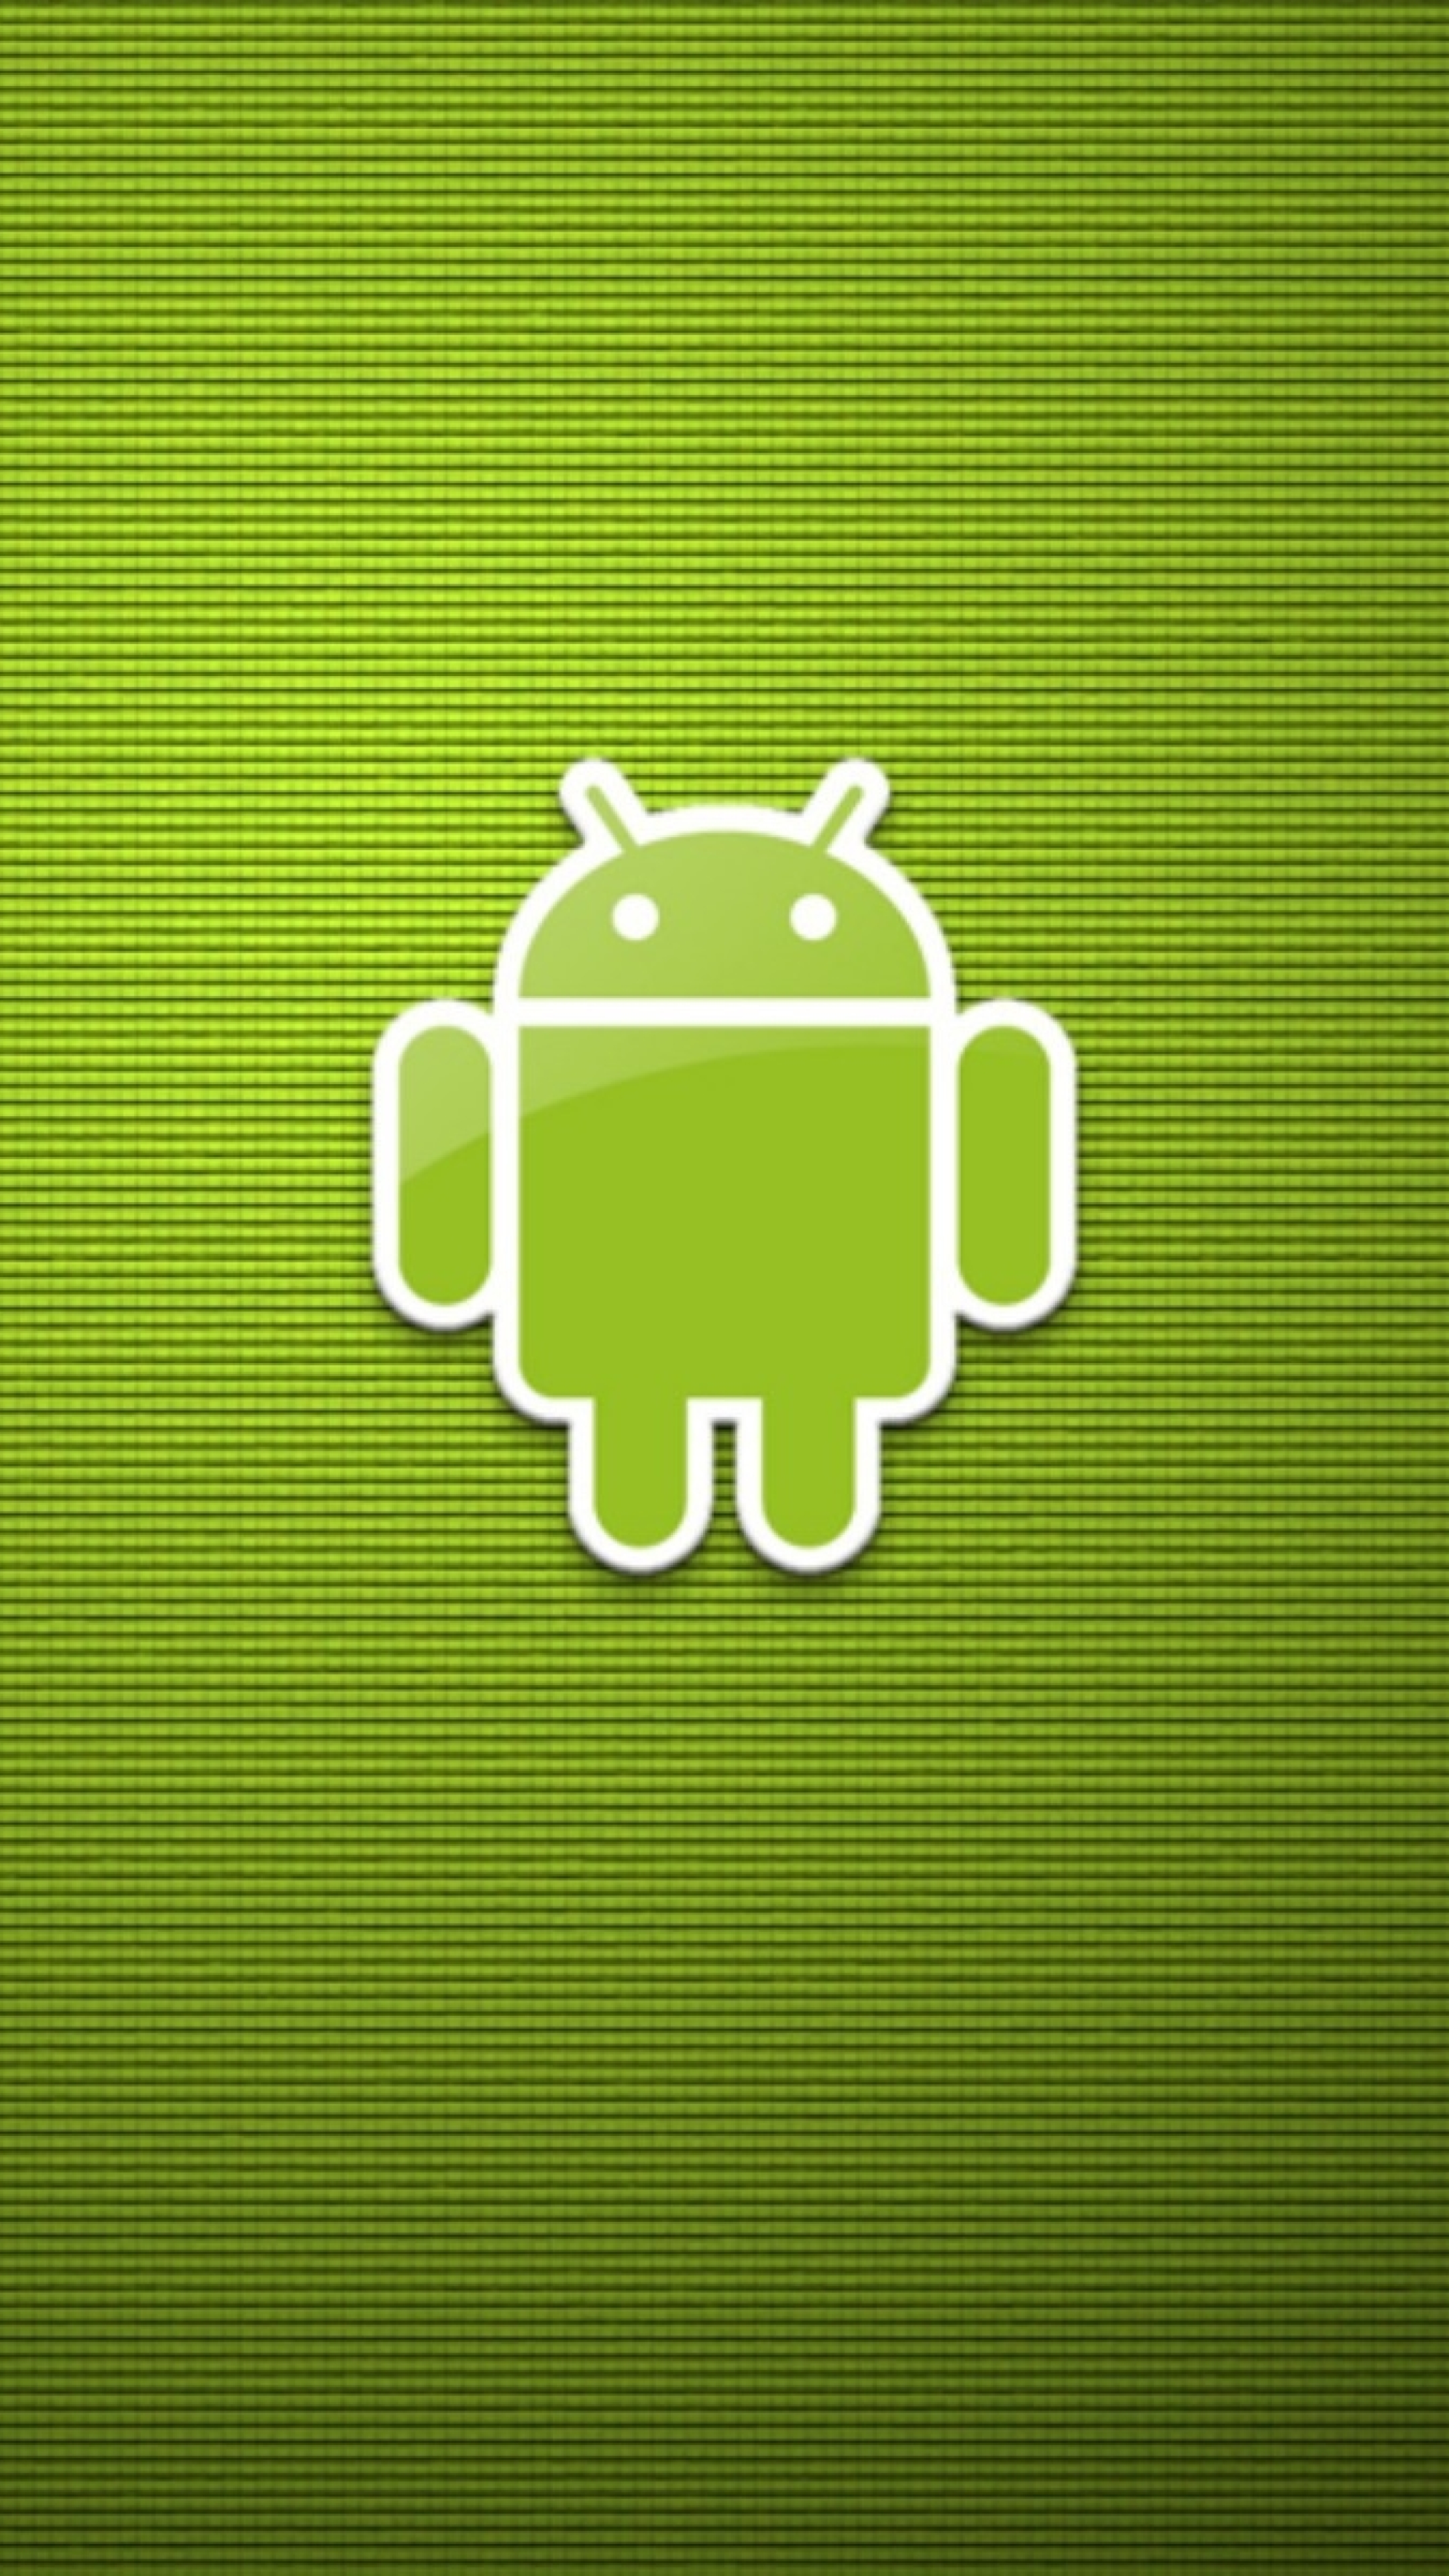 2160x3840 Android Logo Operating System Sony Xperia X Xz Z5 Premium Wallpaper Hd Hi Tech 4k Wallpapers Images Photos And Background Wallpapers Den